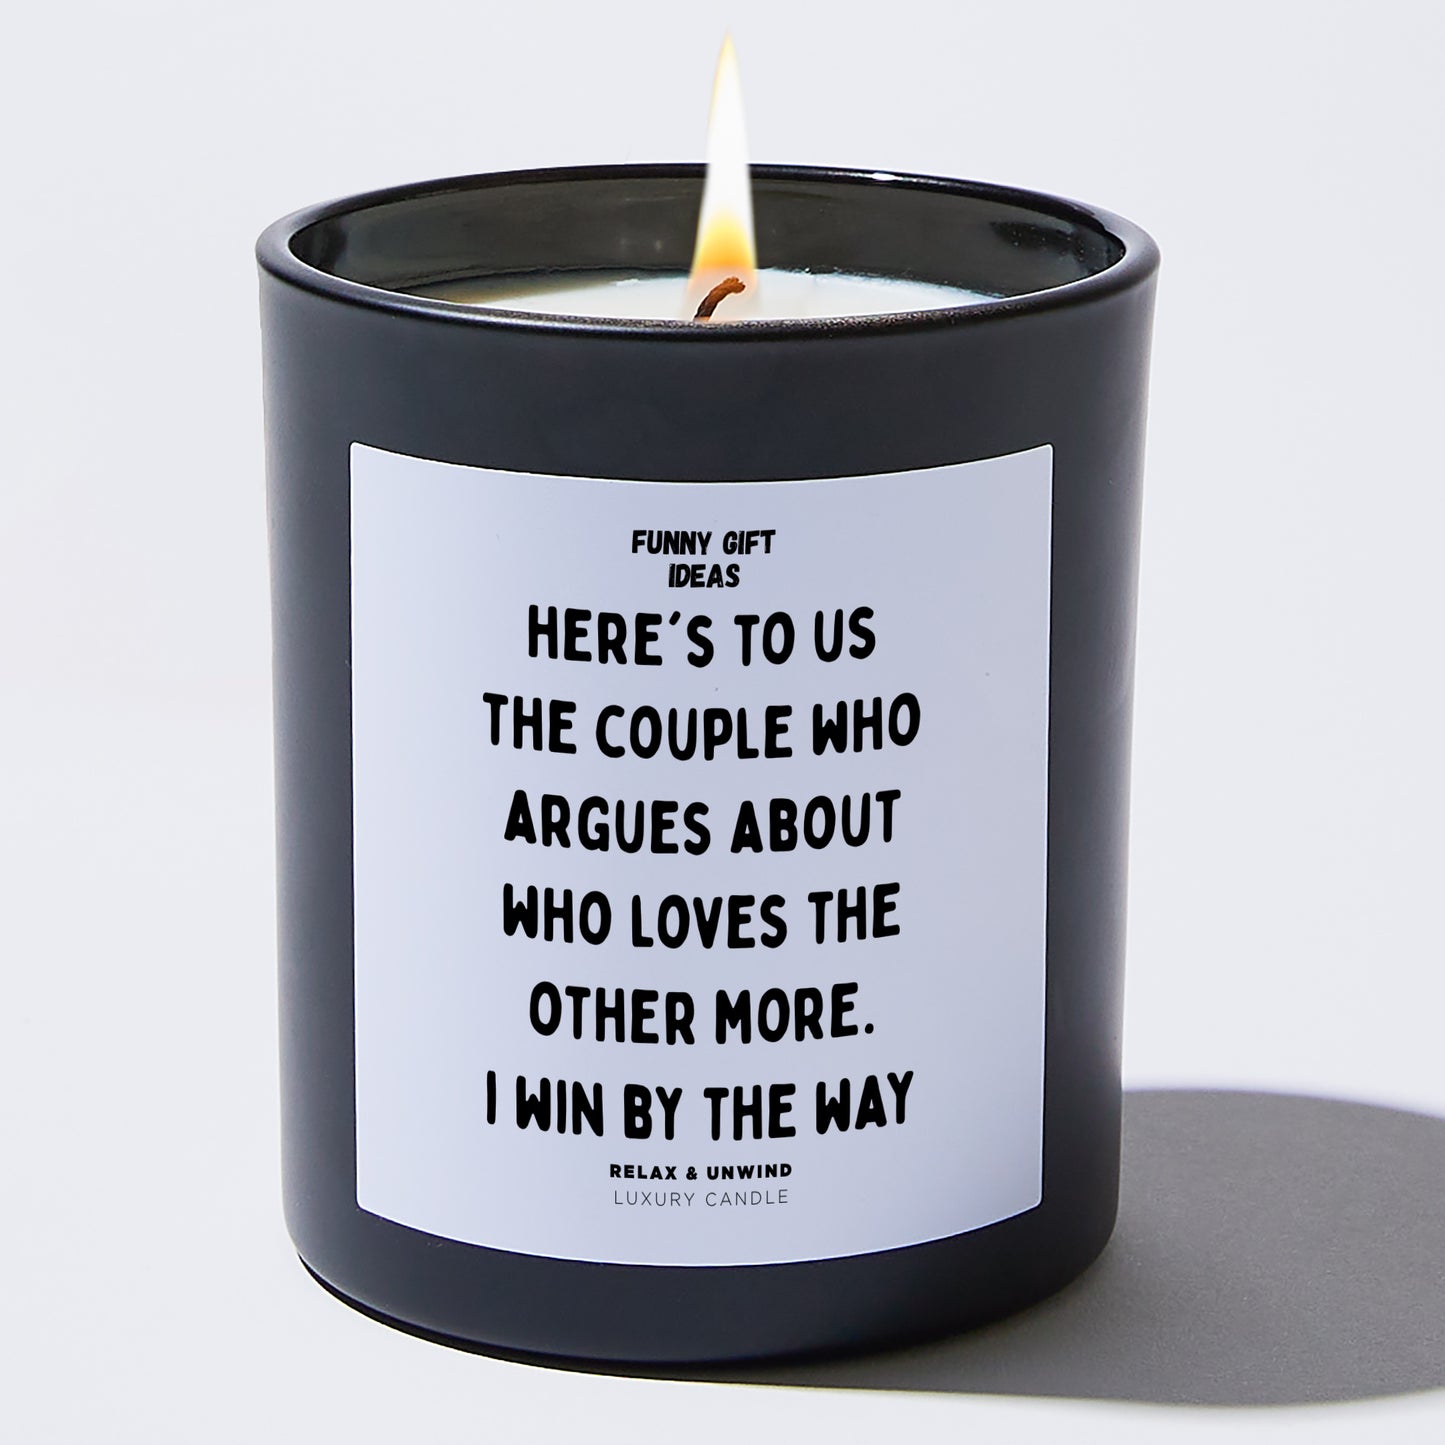 Anniversary Here's to Us, the Couple Who Argues About Who Loves the Other More. I Win, by the Way. - Funny Gift Ideas